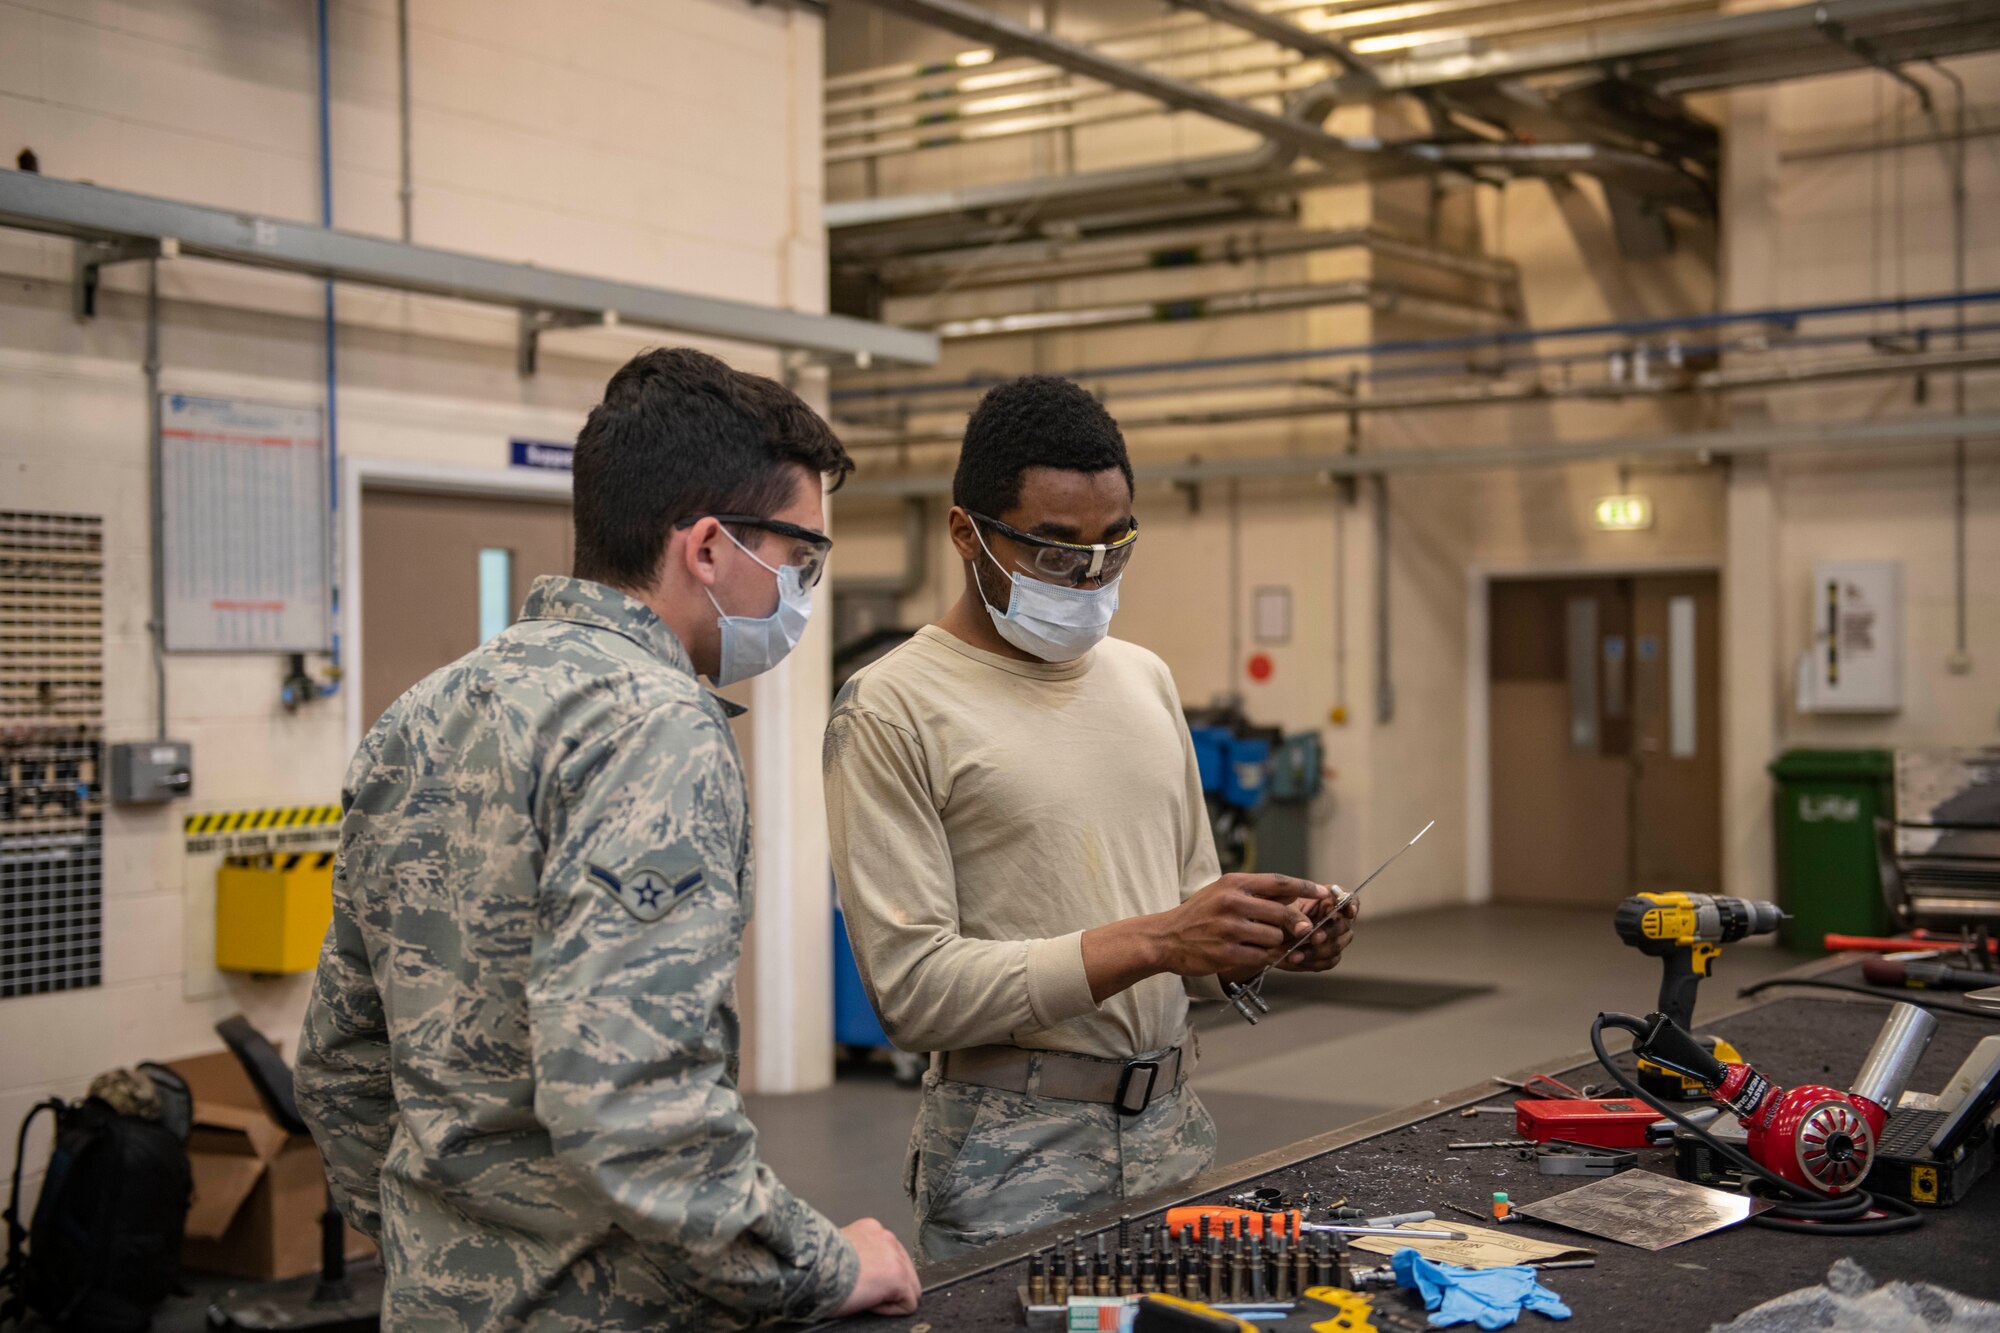 Airman 1st Class Jevaughn Harvey, 100th Maintenance aircraft structural maintenance apprentice, trains Airman Gavin Walker, 100th MXS aircraft structural maintenance apprentice, on taking stuck screws out of a piece of metal, at RAF Mildenhall, England, April 8, 2020. The 100th MXS aircraft structural maintenance shop preserves and extends the life of components for all Team Mildenhall airframes. (U.S. Air Force photo by Staff Sgt. Luke Milano)